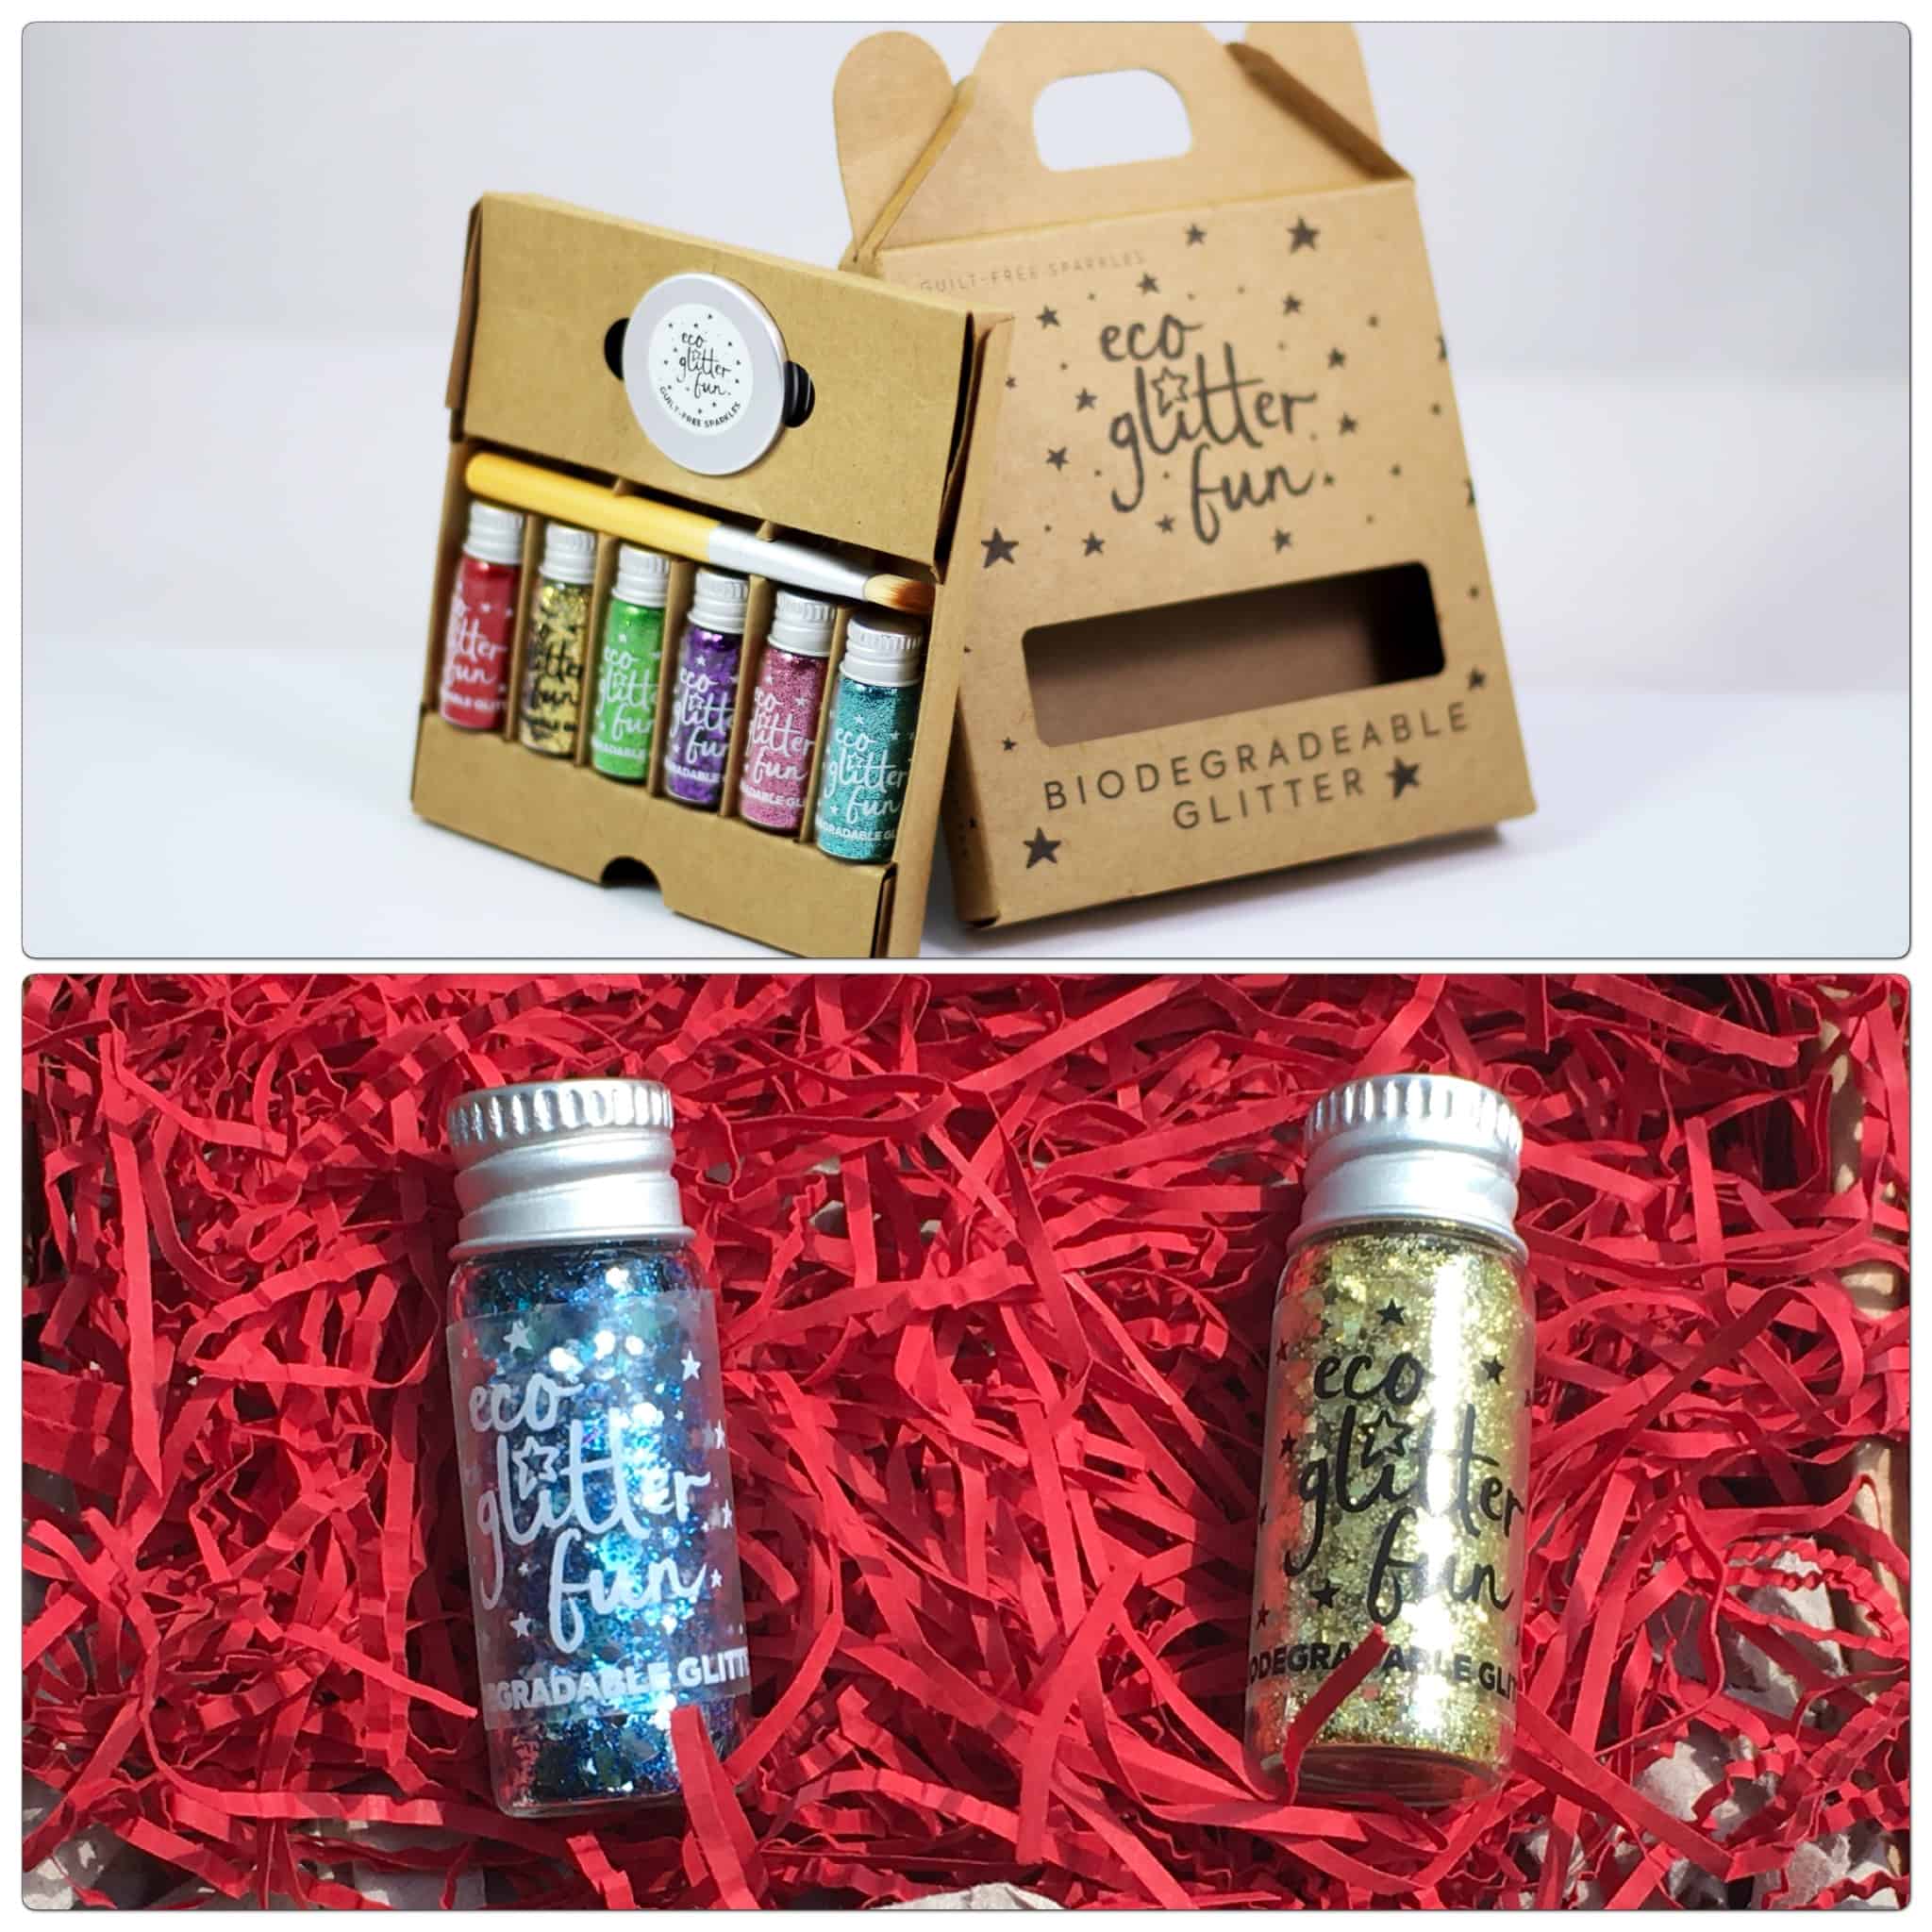 Eco Glitter Fun: Biodegradable Glitter for  New Year’s parties!!!